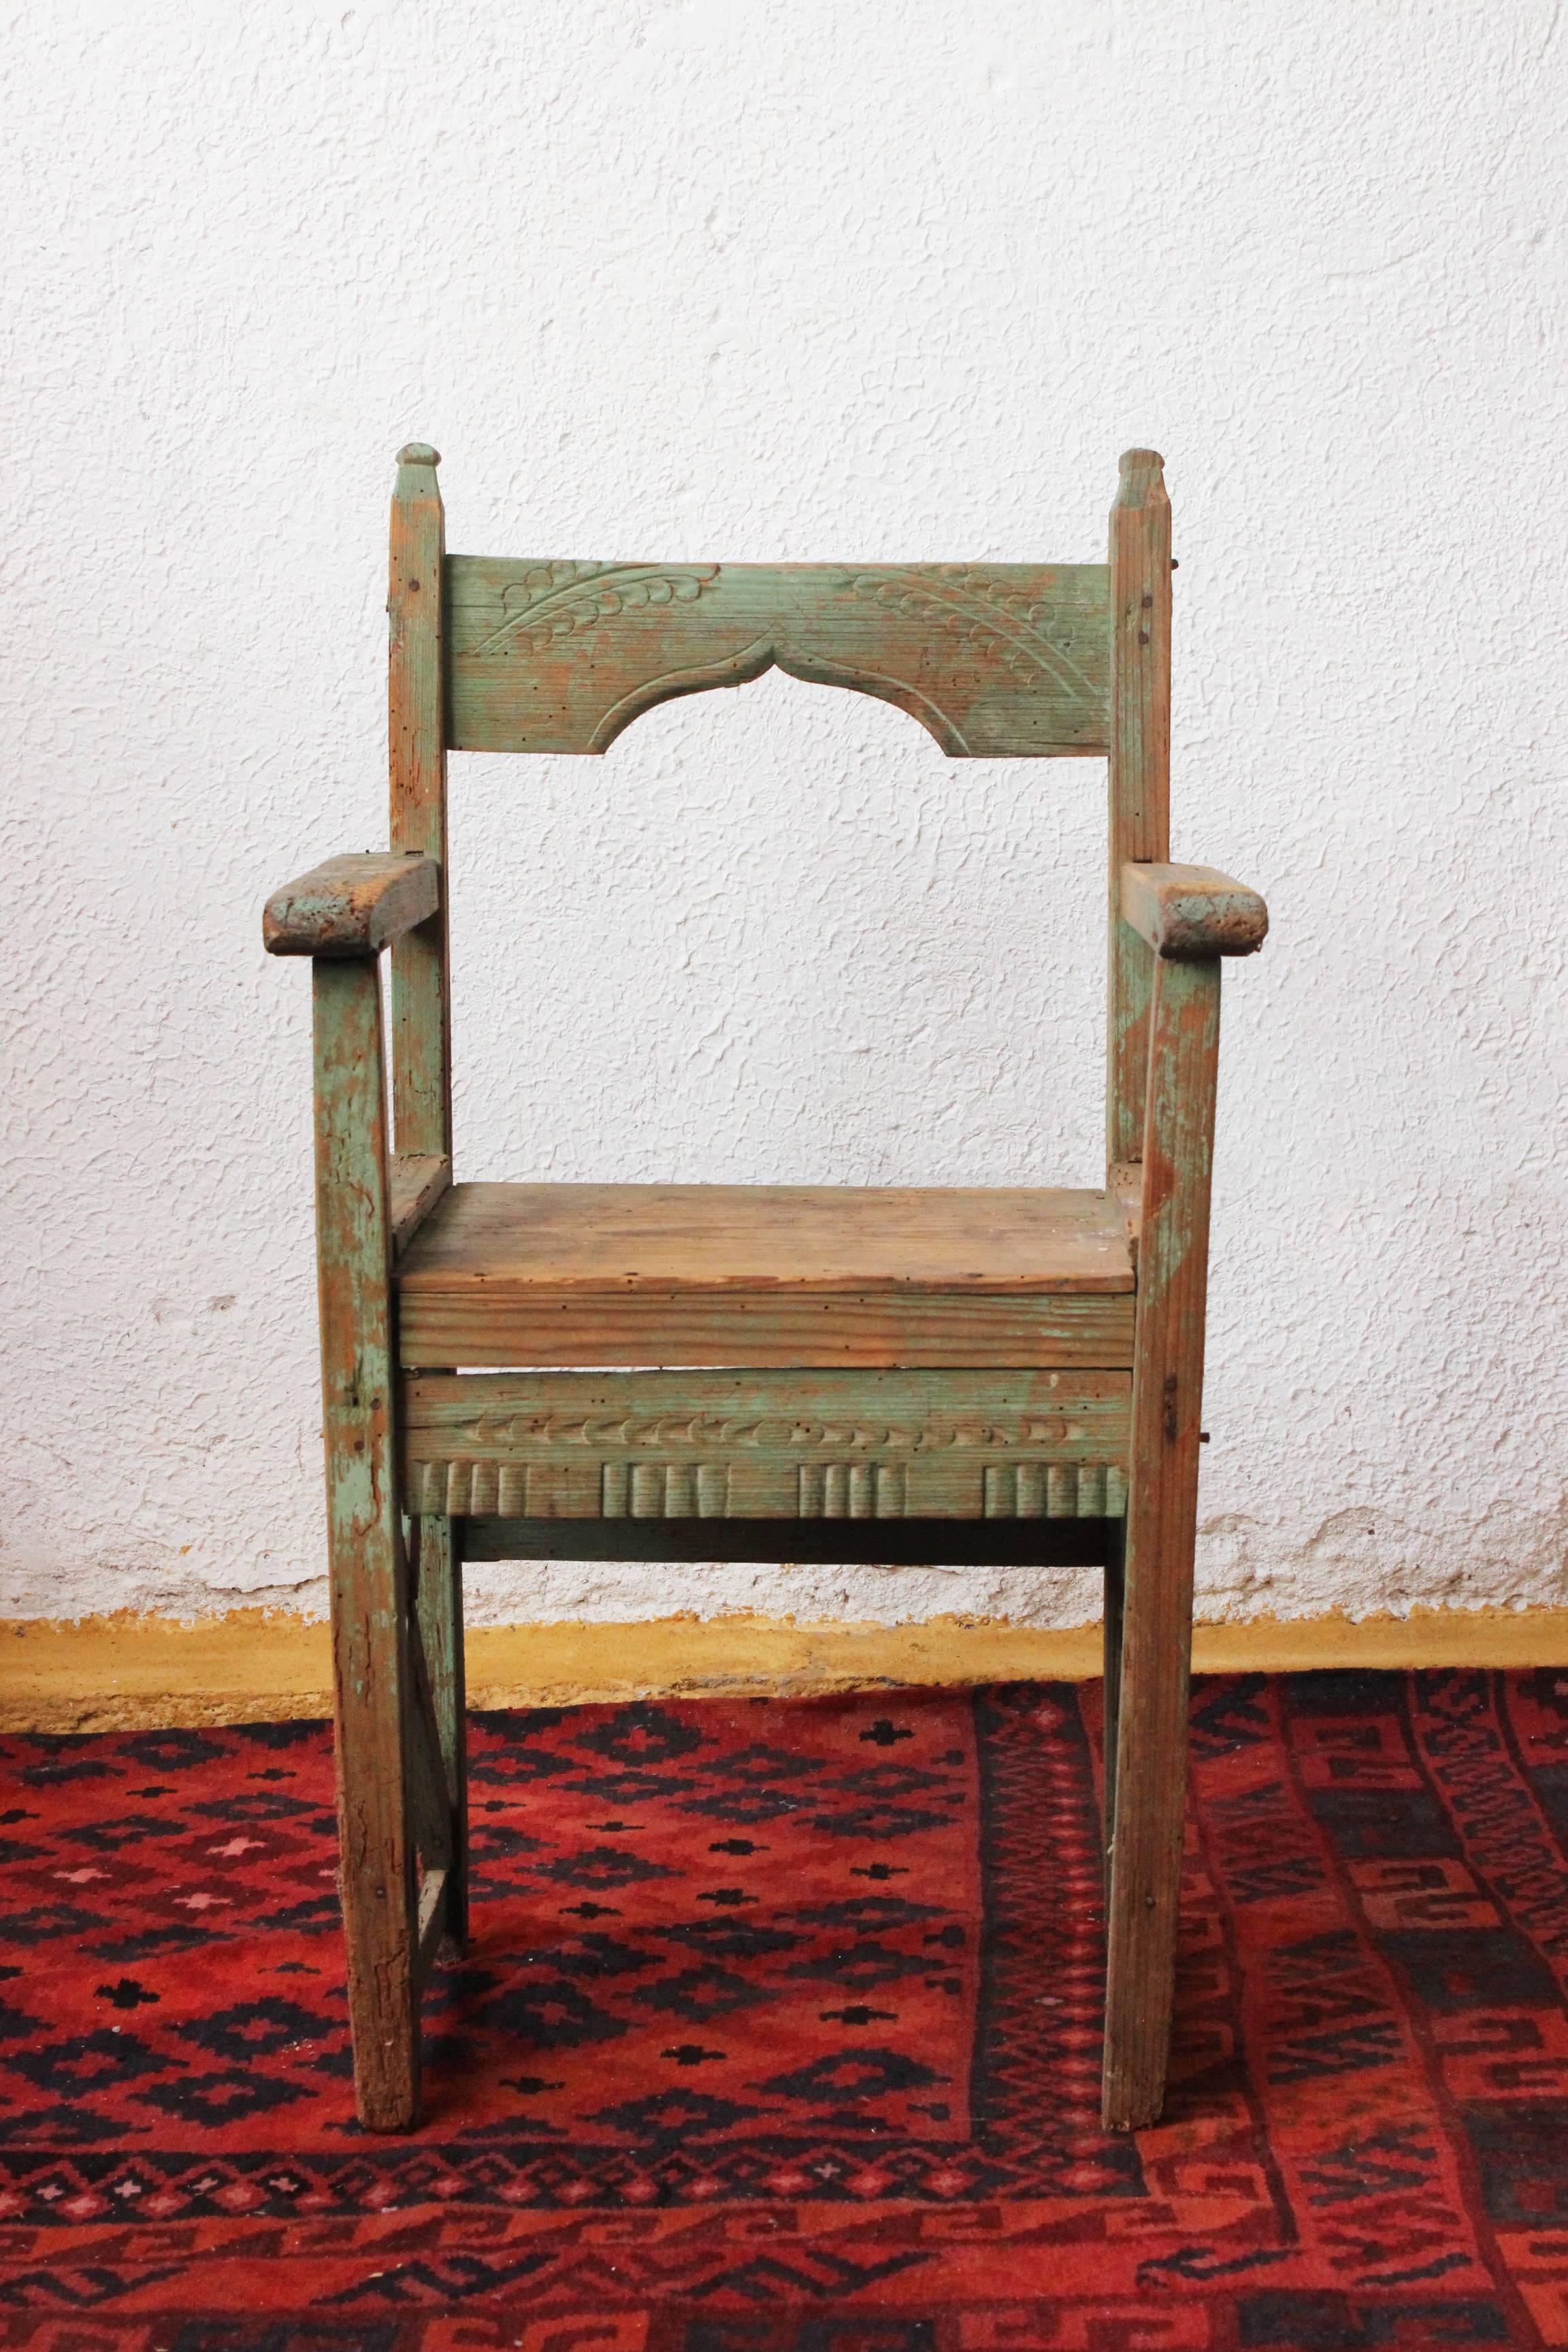 19th Century Hand-Carved Chair Found in Wester México In Good Condition For Sale In Guadalajra, Jal